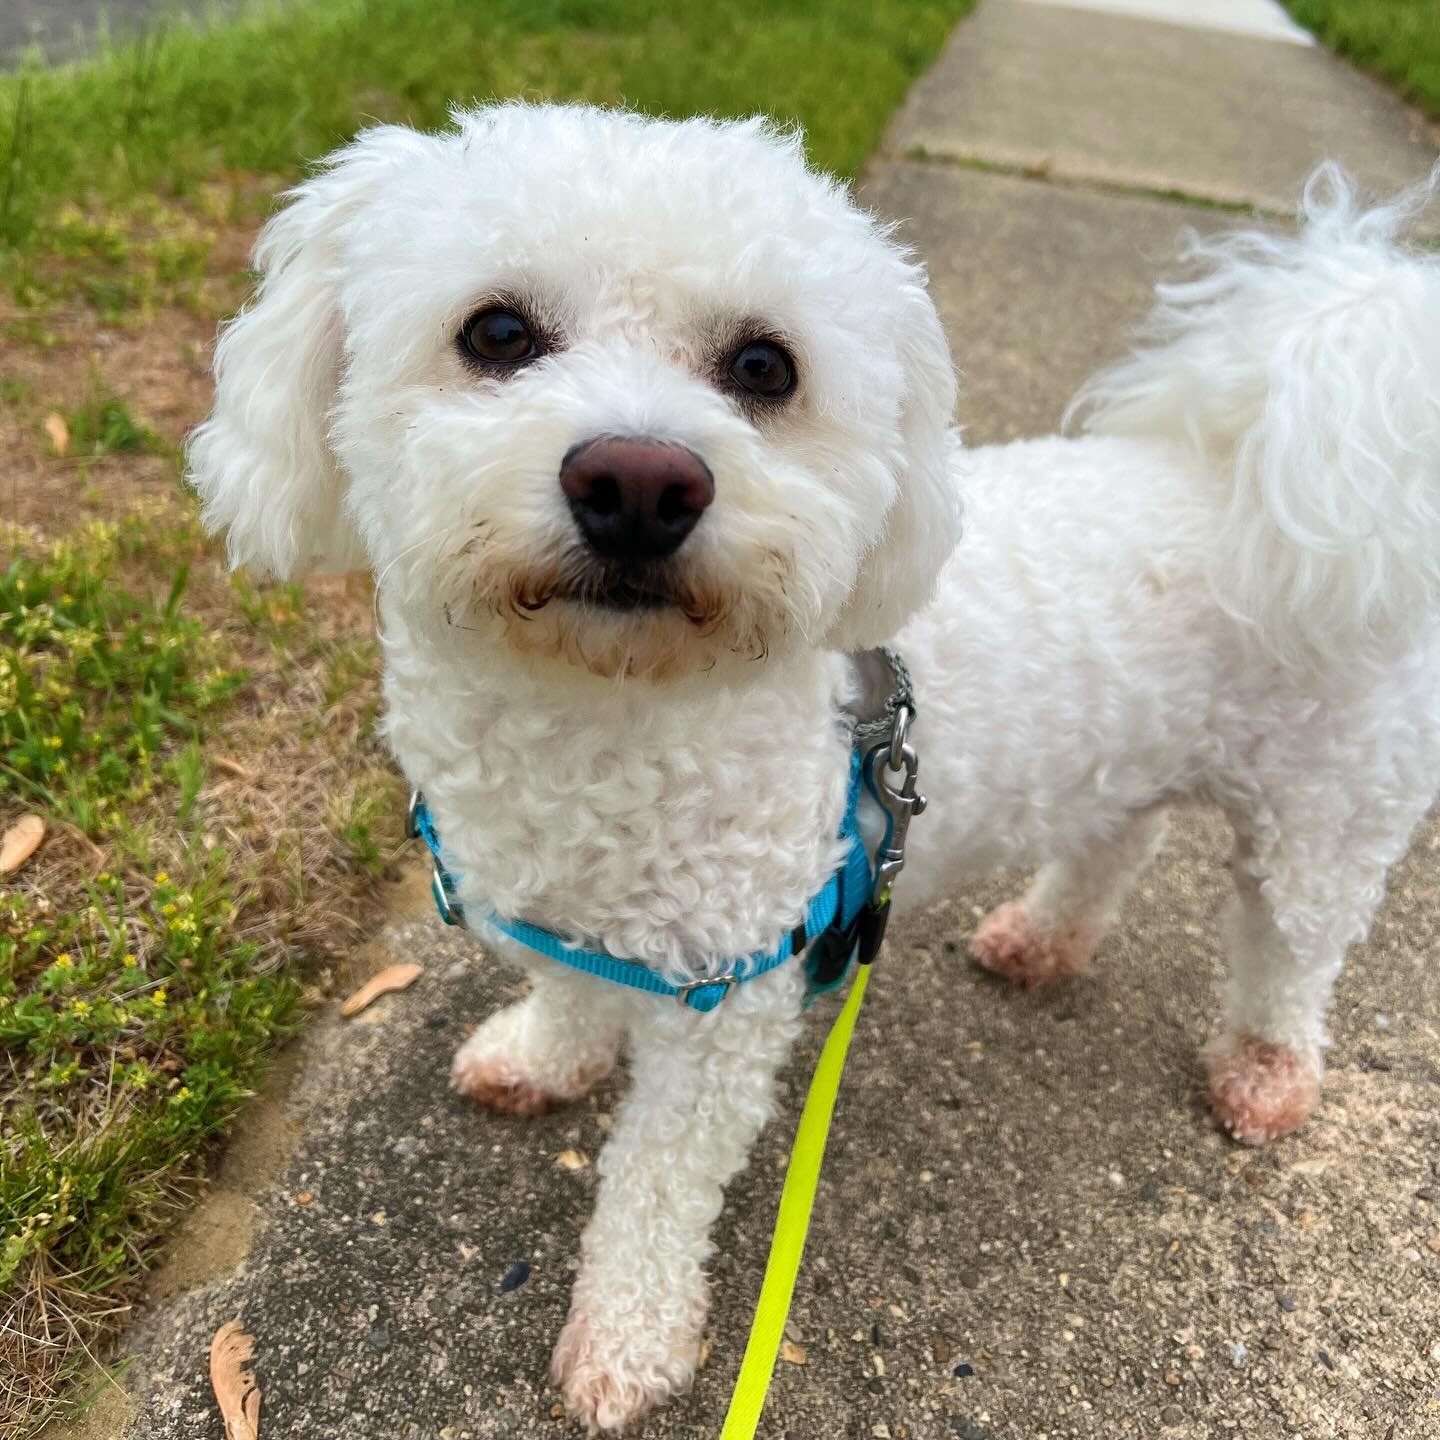 Say hello to Ollie the Bichon! 🤍 Just enjoyed a nice first walk with this sweet boy!